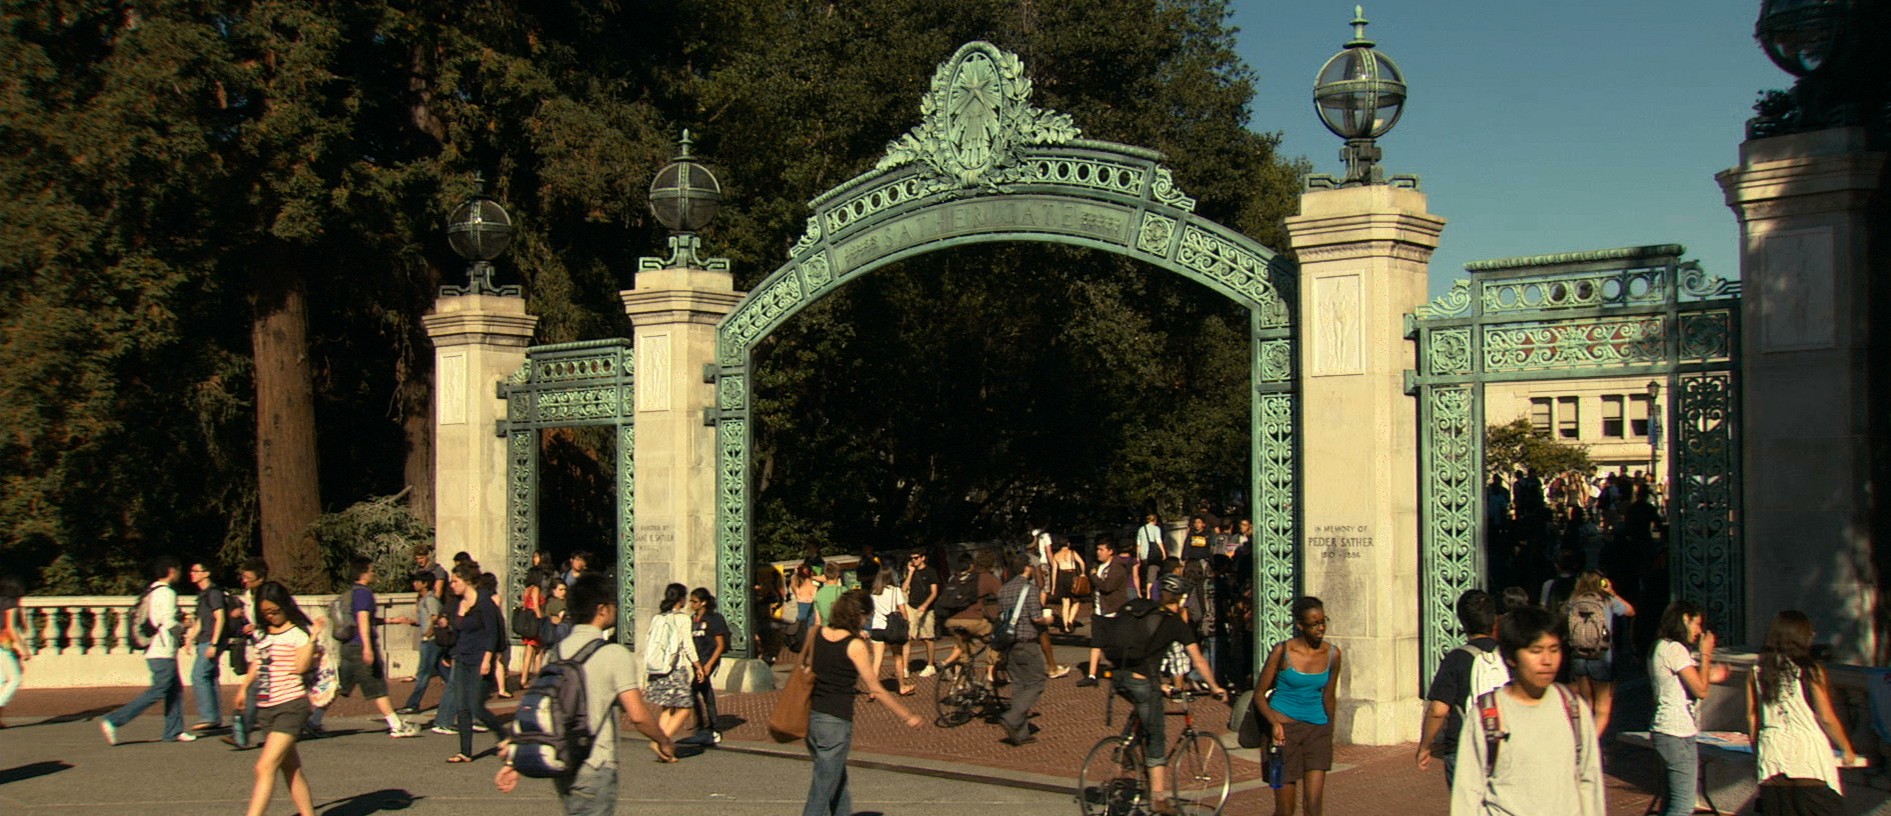 Some Thoughts on the Study of Terminal Institutions in Frederick Wisemans At Berkeley